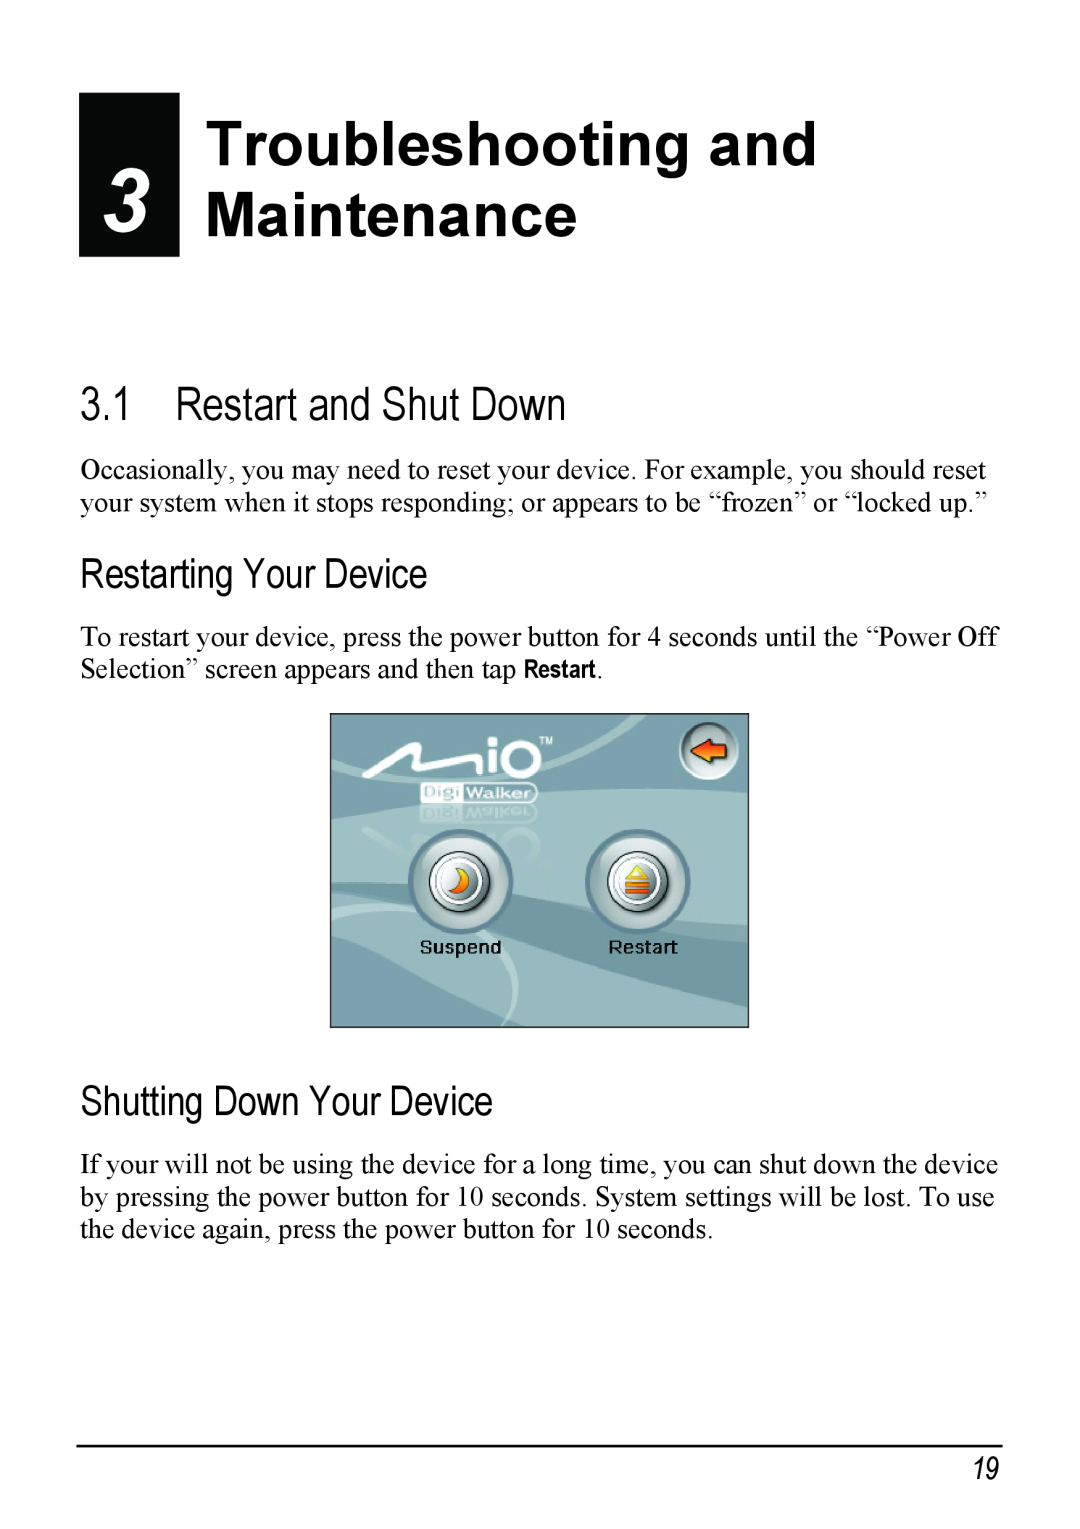 Jabra C220 manual Troubleshooting and Maintenance, Restart and Shut Down, Restarting Your Device, Shutting Down Your Device 